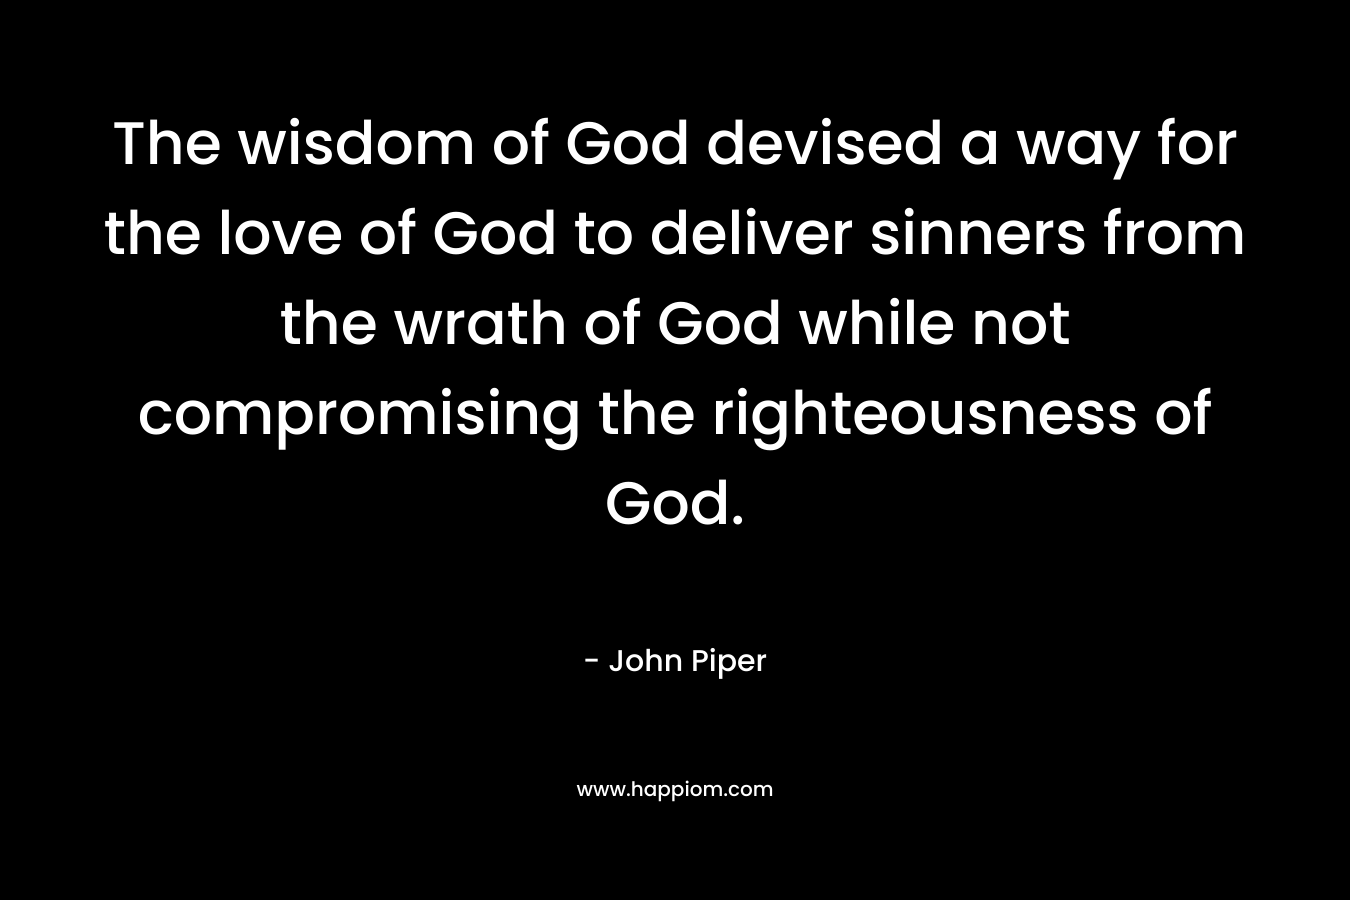 The wisdom of God devised a way for the love of God to deliver sinners from the wrath of God while not compromising the righteousness of God. – John Piper